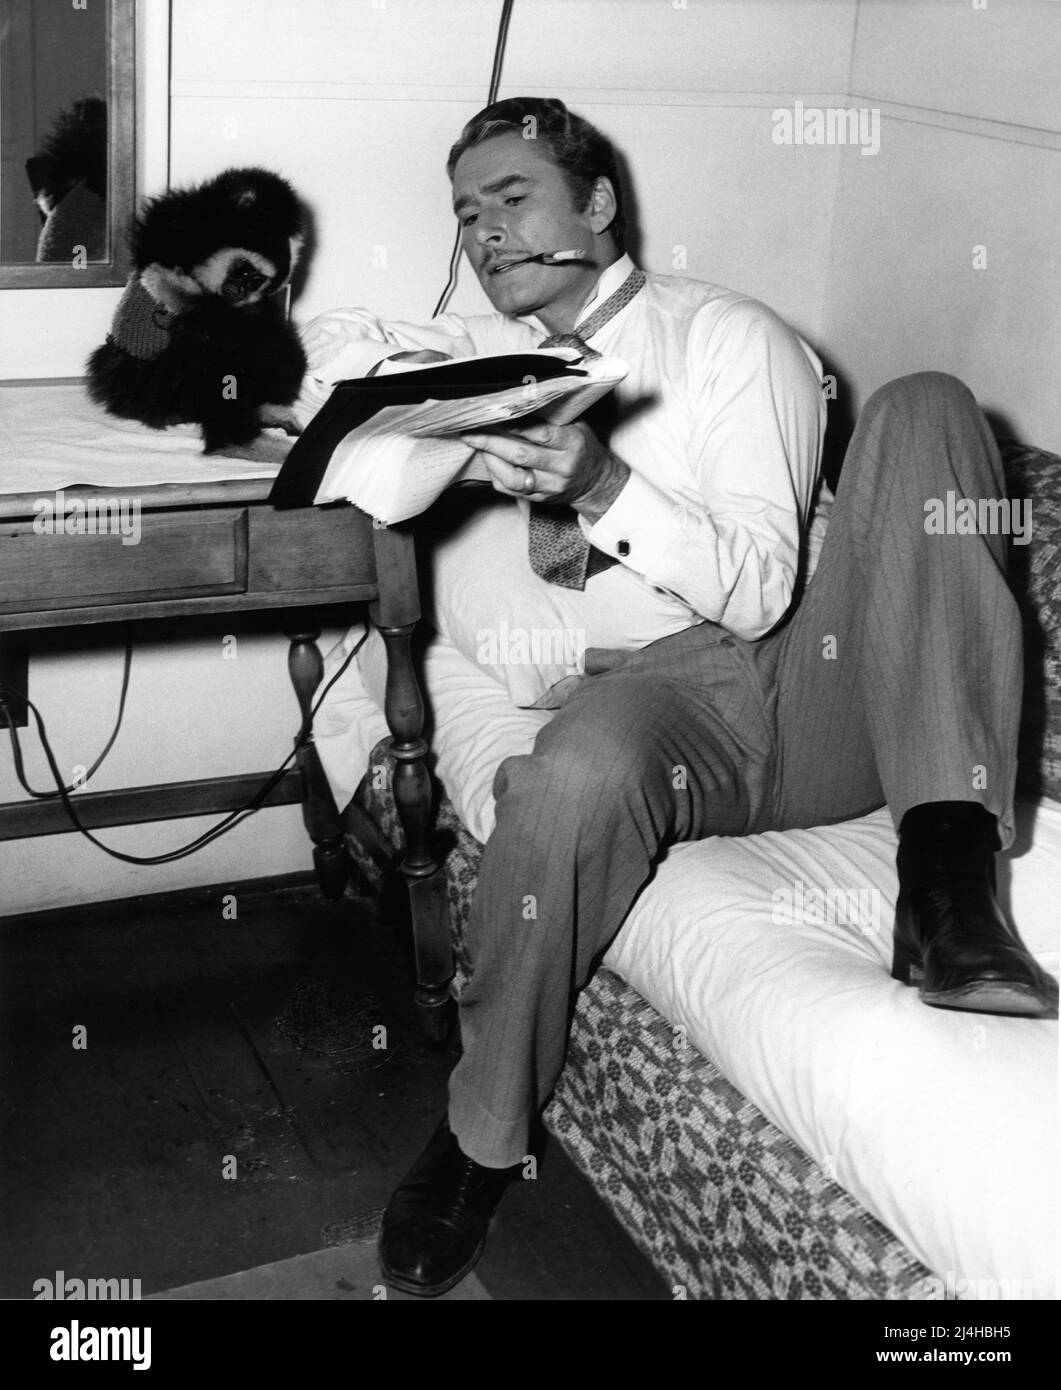 ERROL FLYNN in his Dressing Room showing his pet gibbon monkey CHICO his script on set candid during filming of SILVER RIVER 1948 director RAOUL WALSH novel Stephen Longstreet costume design Marjorie Best and Travilla music Max Steiner Warner Bros. Stock Photo